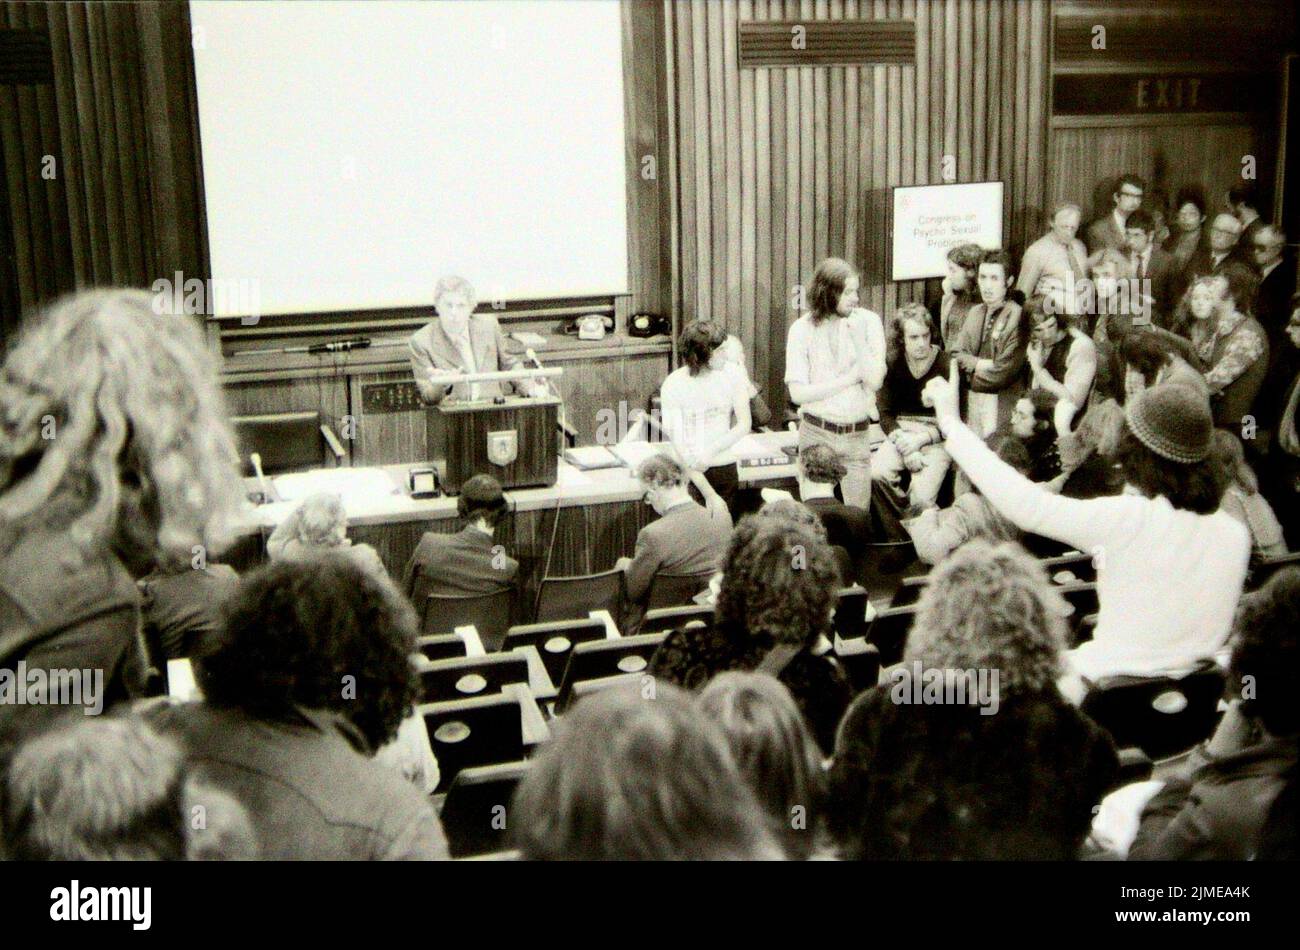 In September, 1974, dozens of lesbian and gay demonstrators entered the British Medical Association's 'Congress on Psycho-sexual Problems' in Bradford, Yorkshire, United Kingdom. The demonstrators demanded a discussion on why the medical profession viewed lesbians and gay men negatively and why 'aversion therapy' in the form of electric shocks was still used to attempt to make lesbians and gay men heterosexual. Pictured are some of the demonstrators debating with attendees of the Congress. An organiser of the Congress is at the podium. Stock Photo